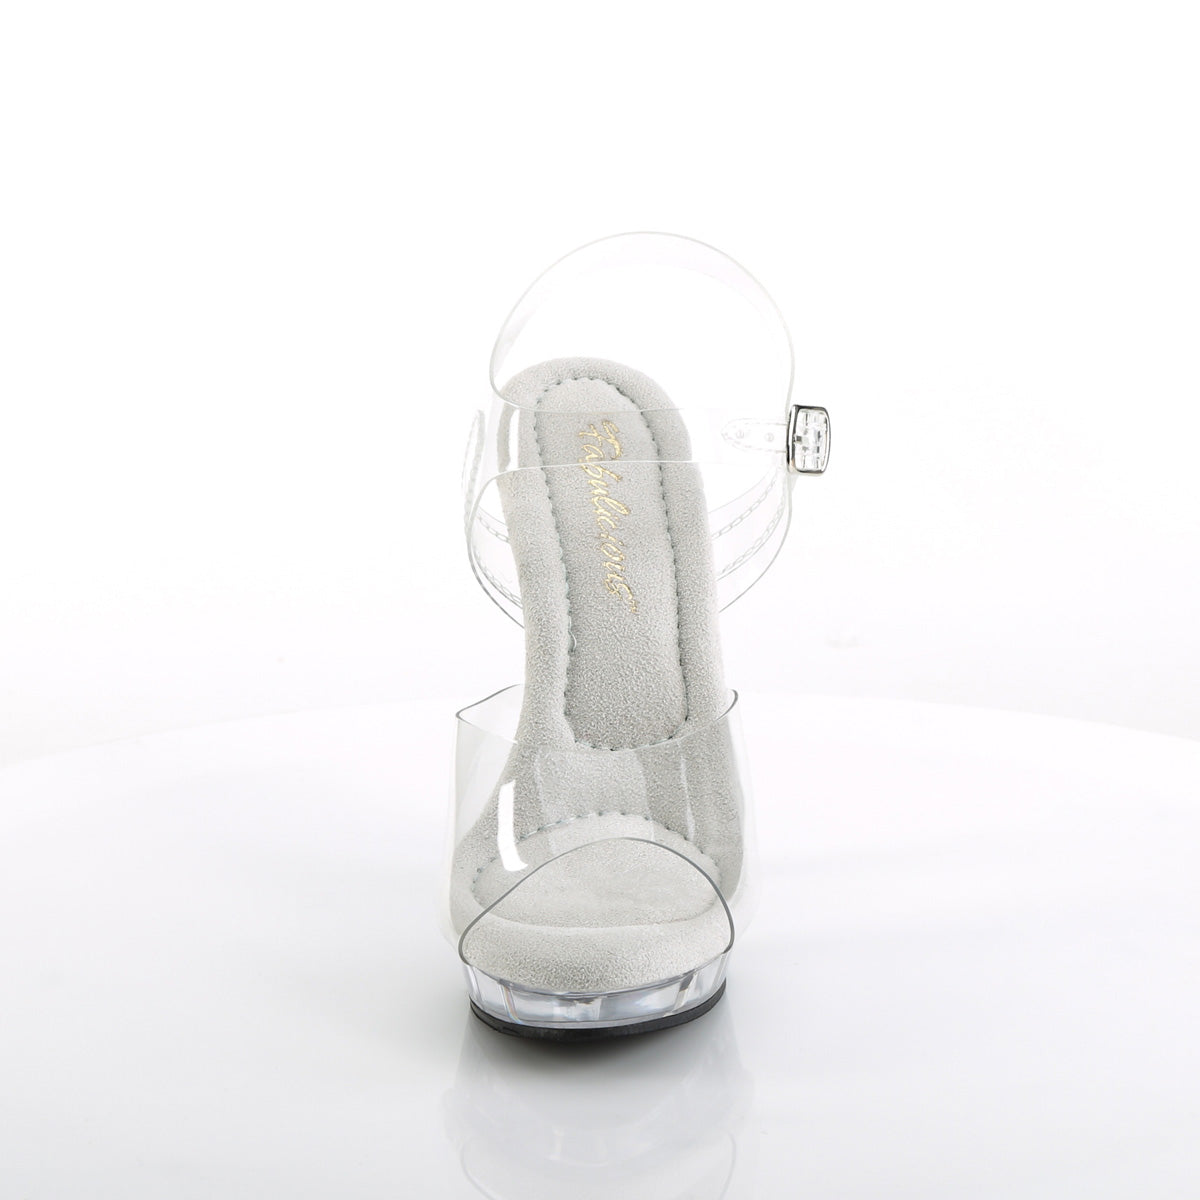 LIP-108 Fabulicious Transparent Clear Shoes [Posing Heels]